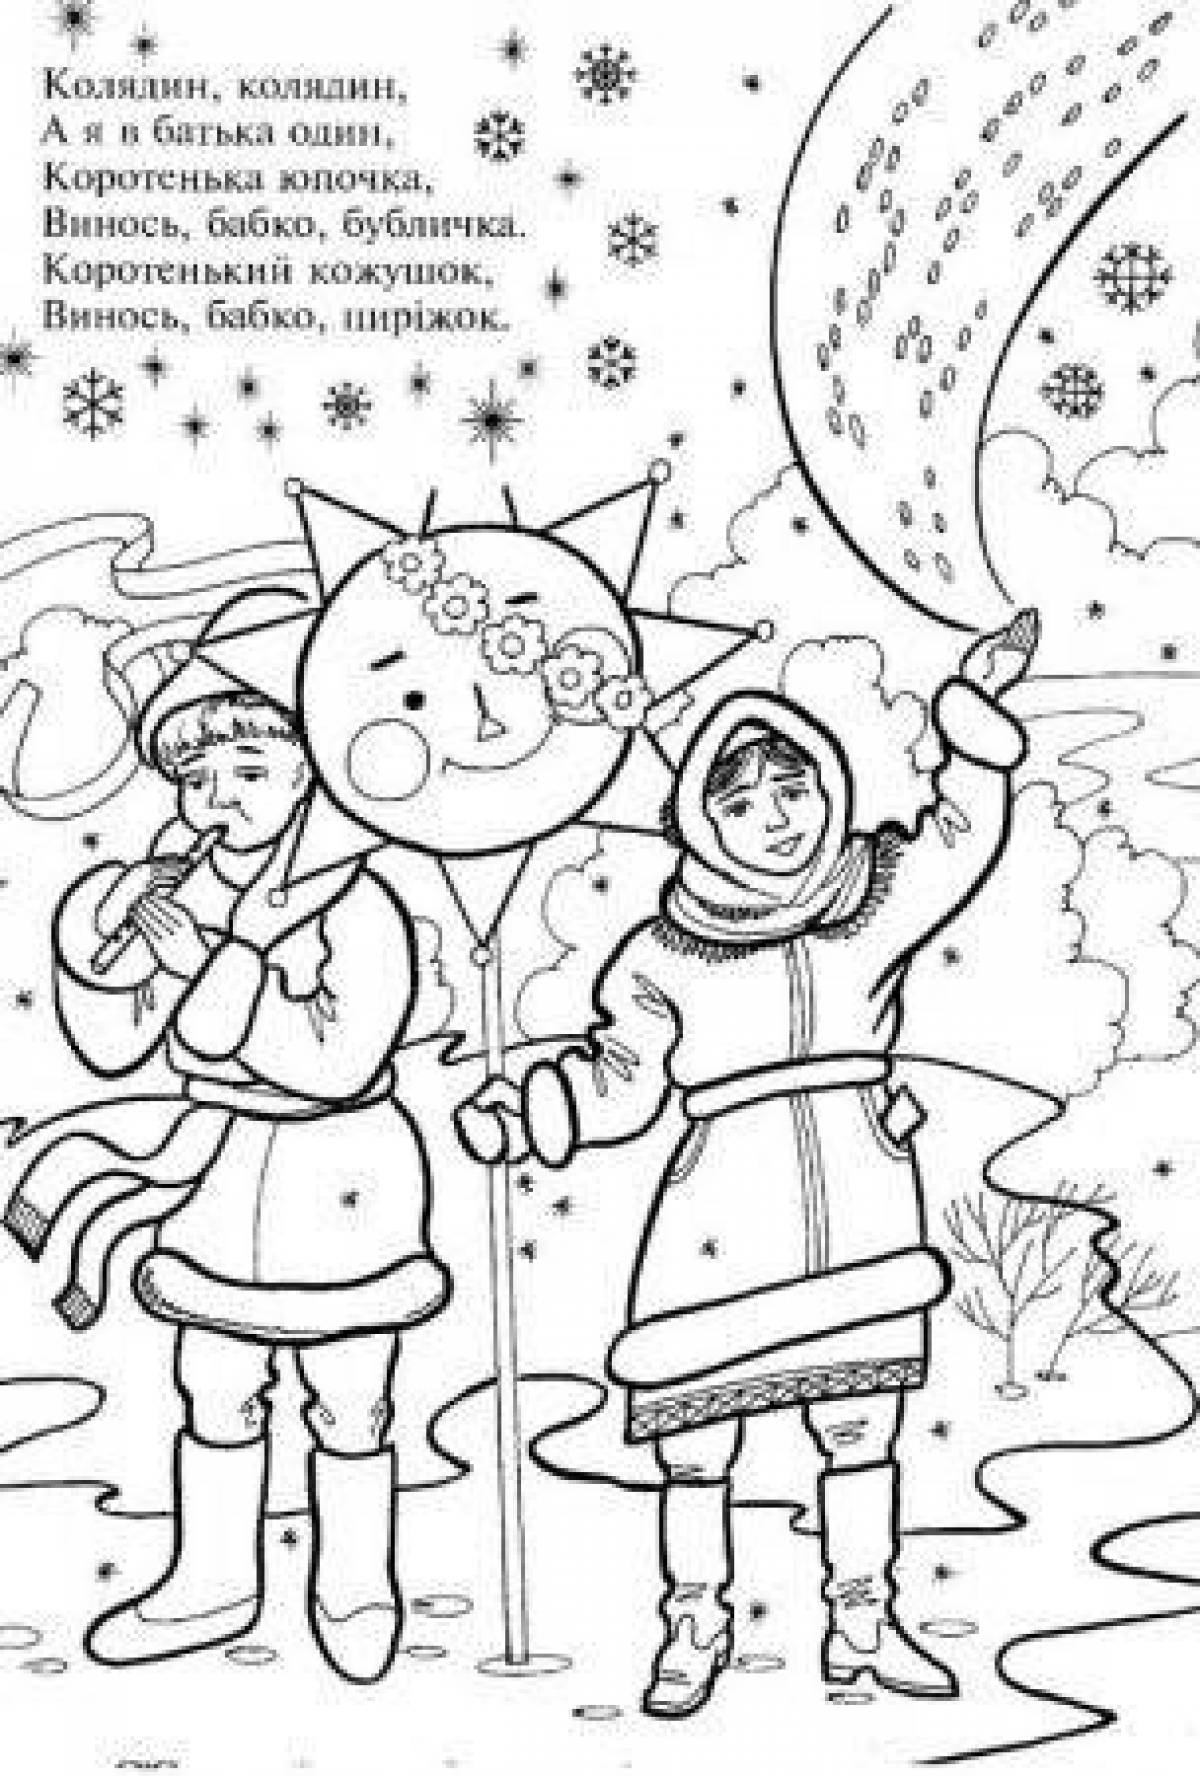 Exciting Christmas carol coloring pages for kids